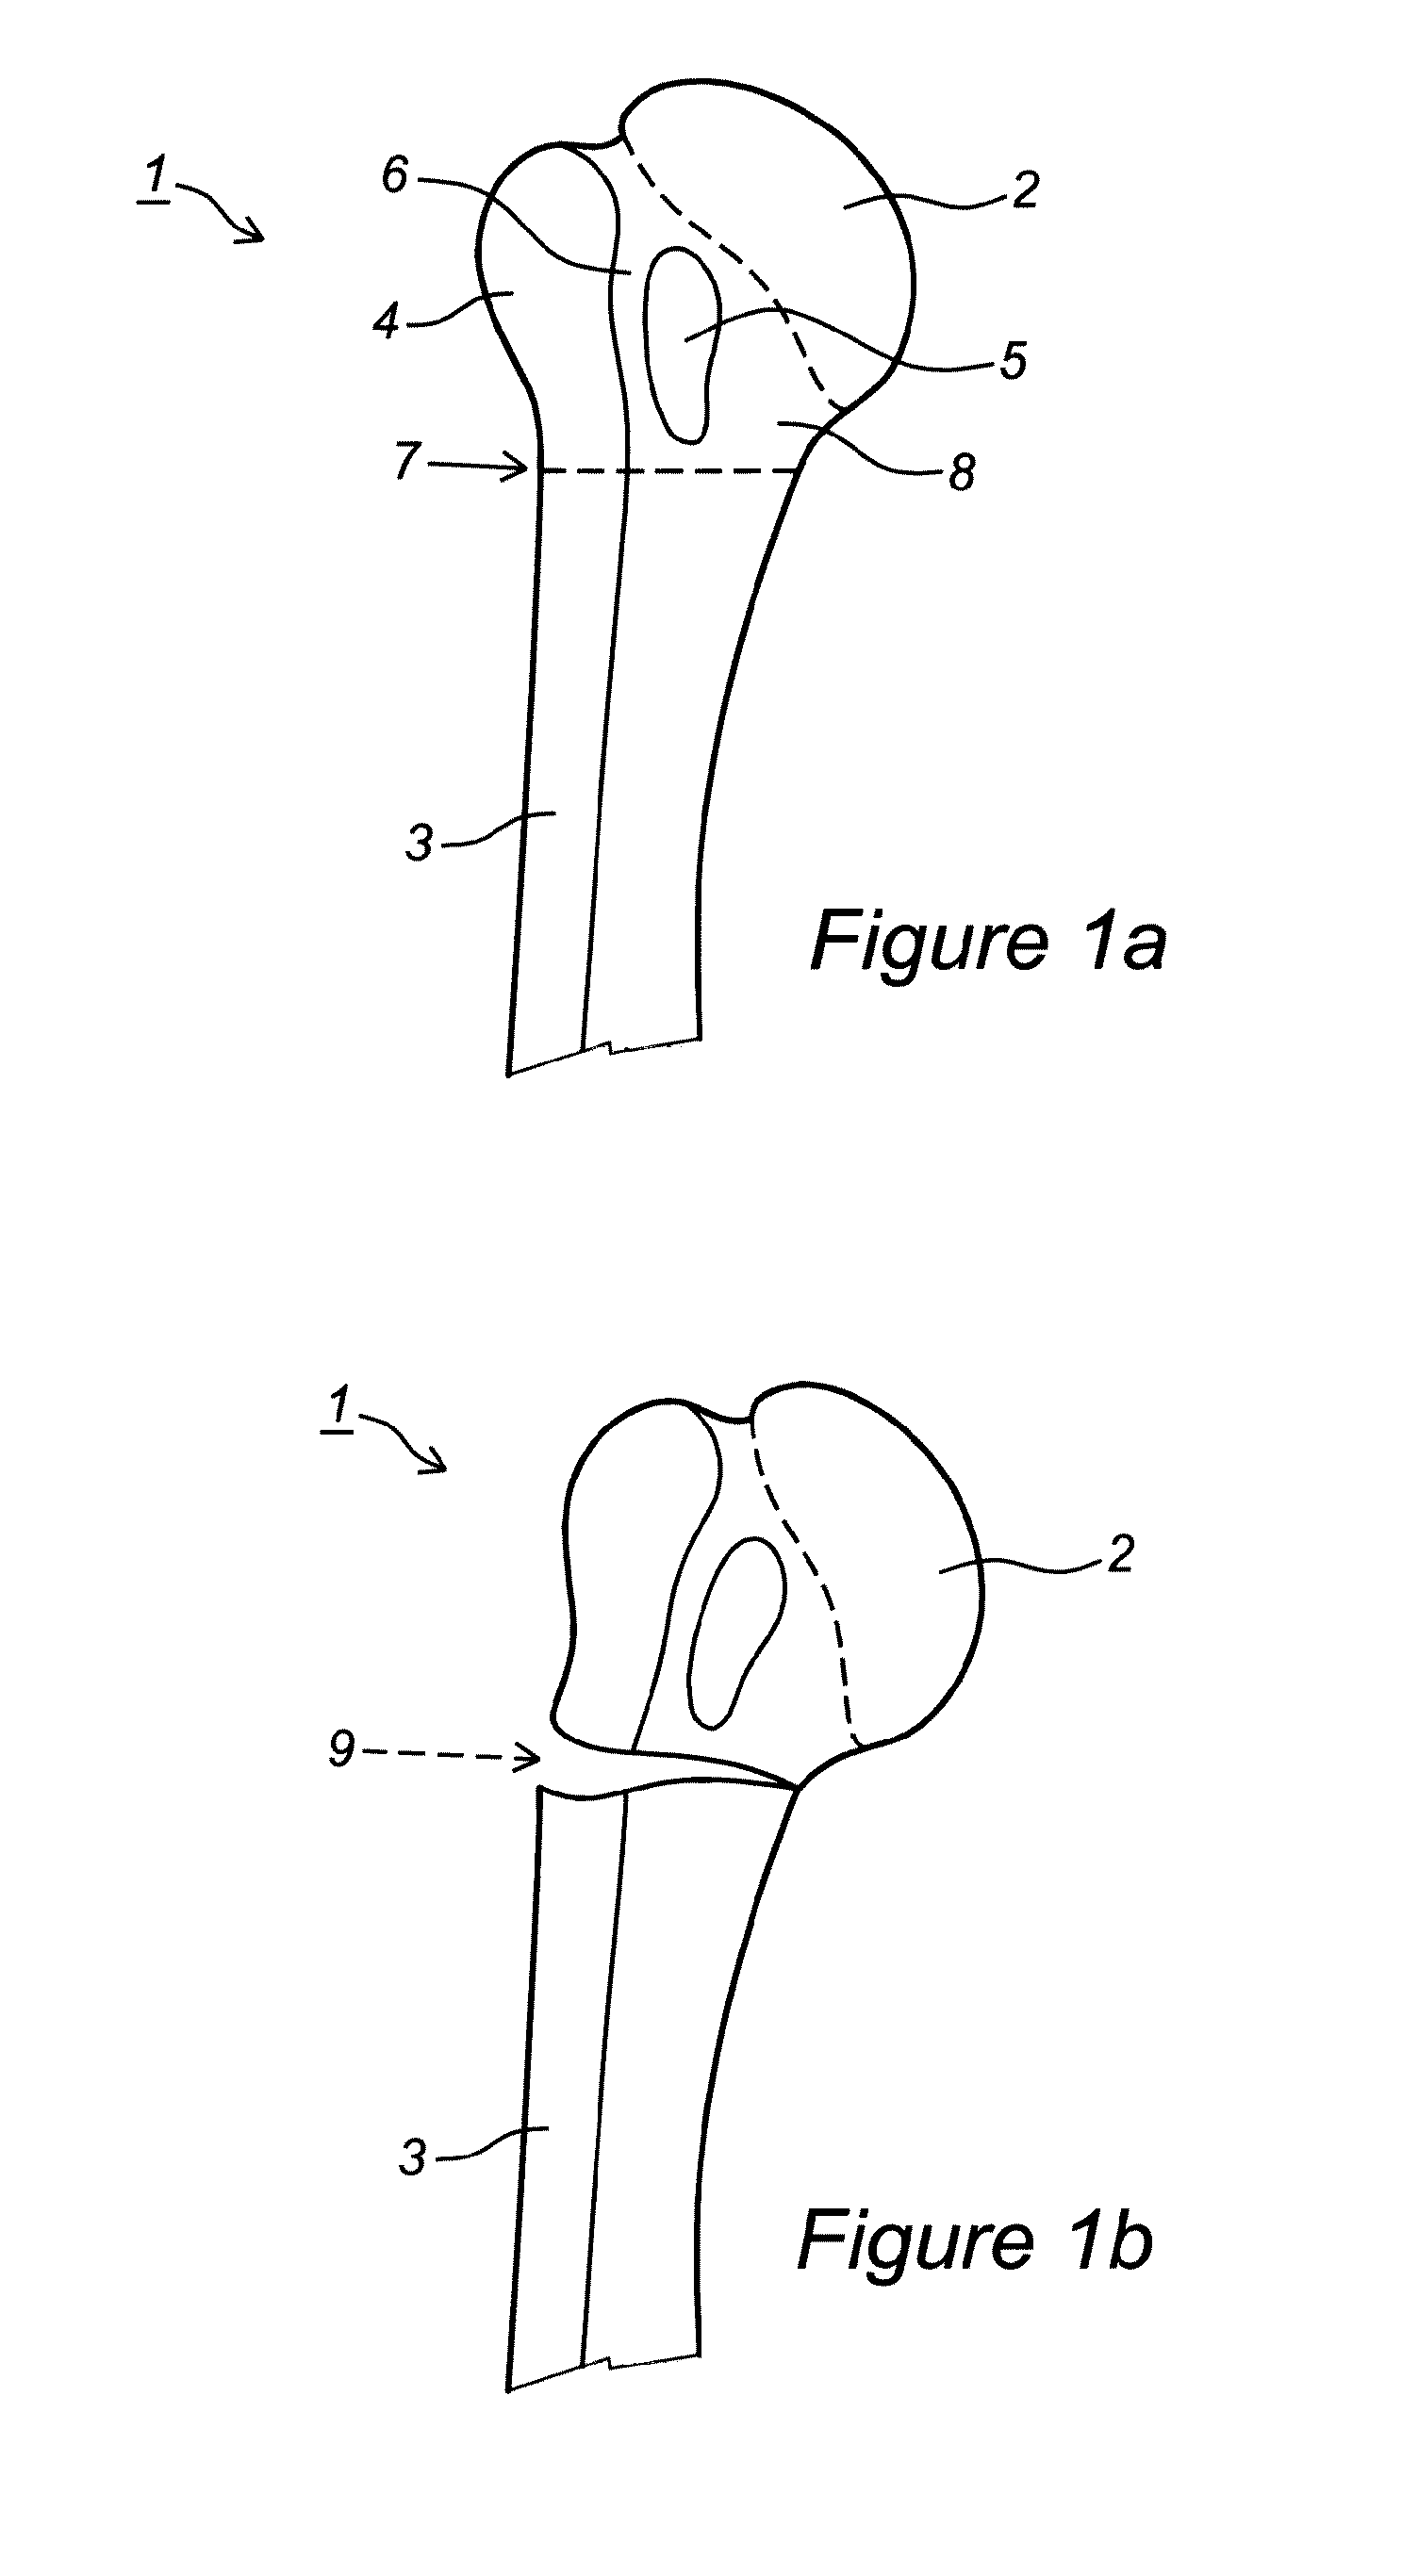 Articular fracture fixation system and method